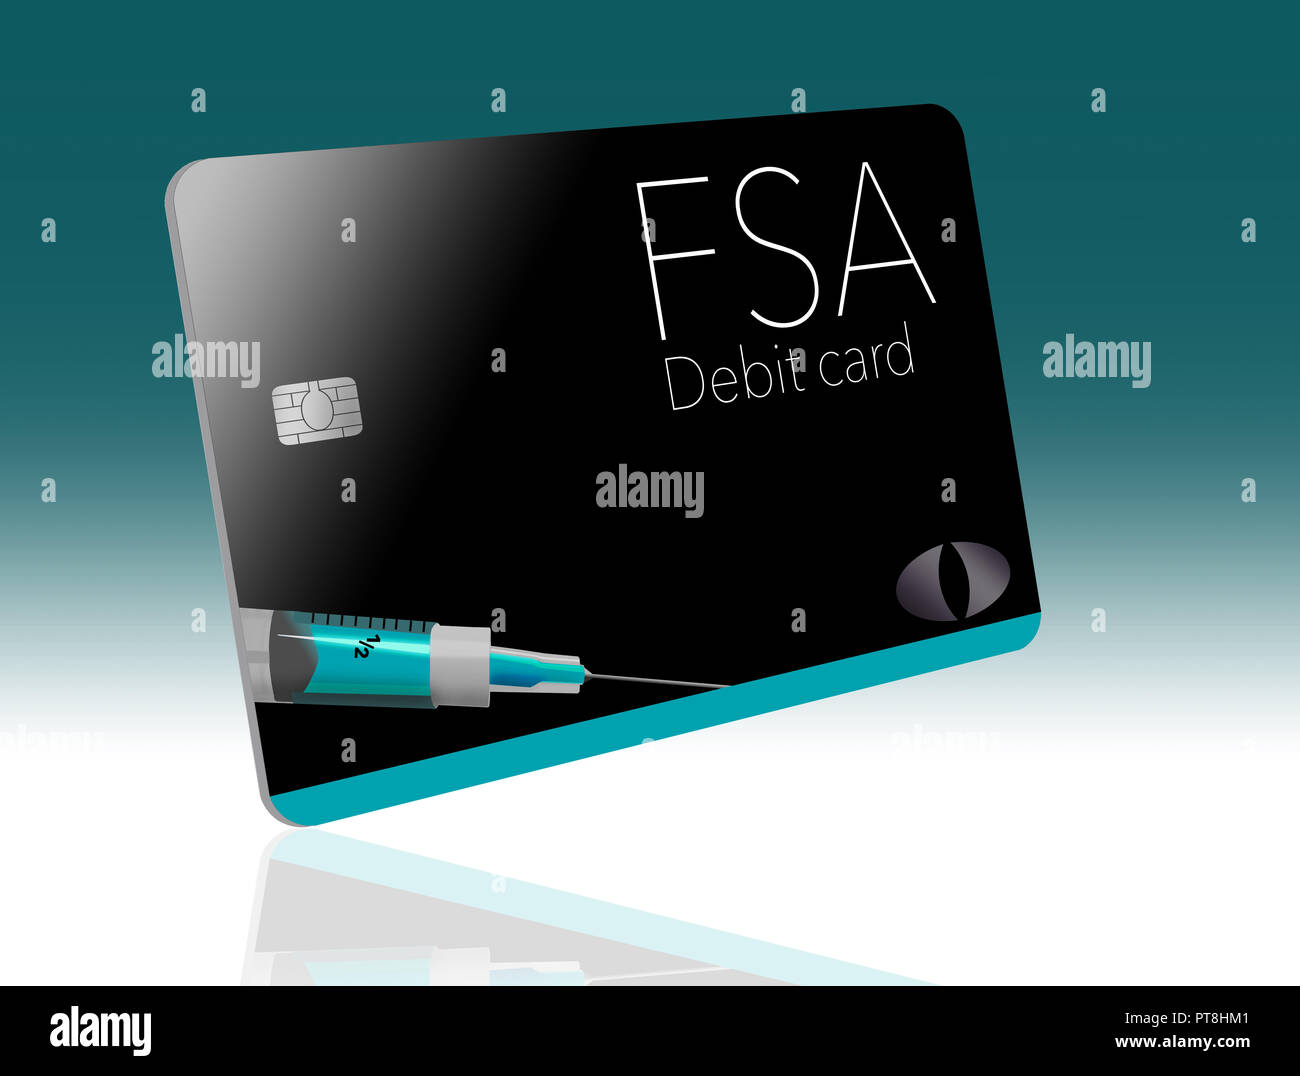 https://c8.alamy.com/comp/PT8HM1/this-is-a-flexible-spending-account-debit-card-this-fsa-card-is-generic-with-mock-logos-this-is-an-illustration-PT8HM1.jpg